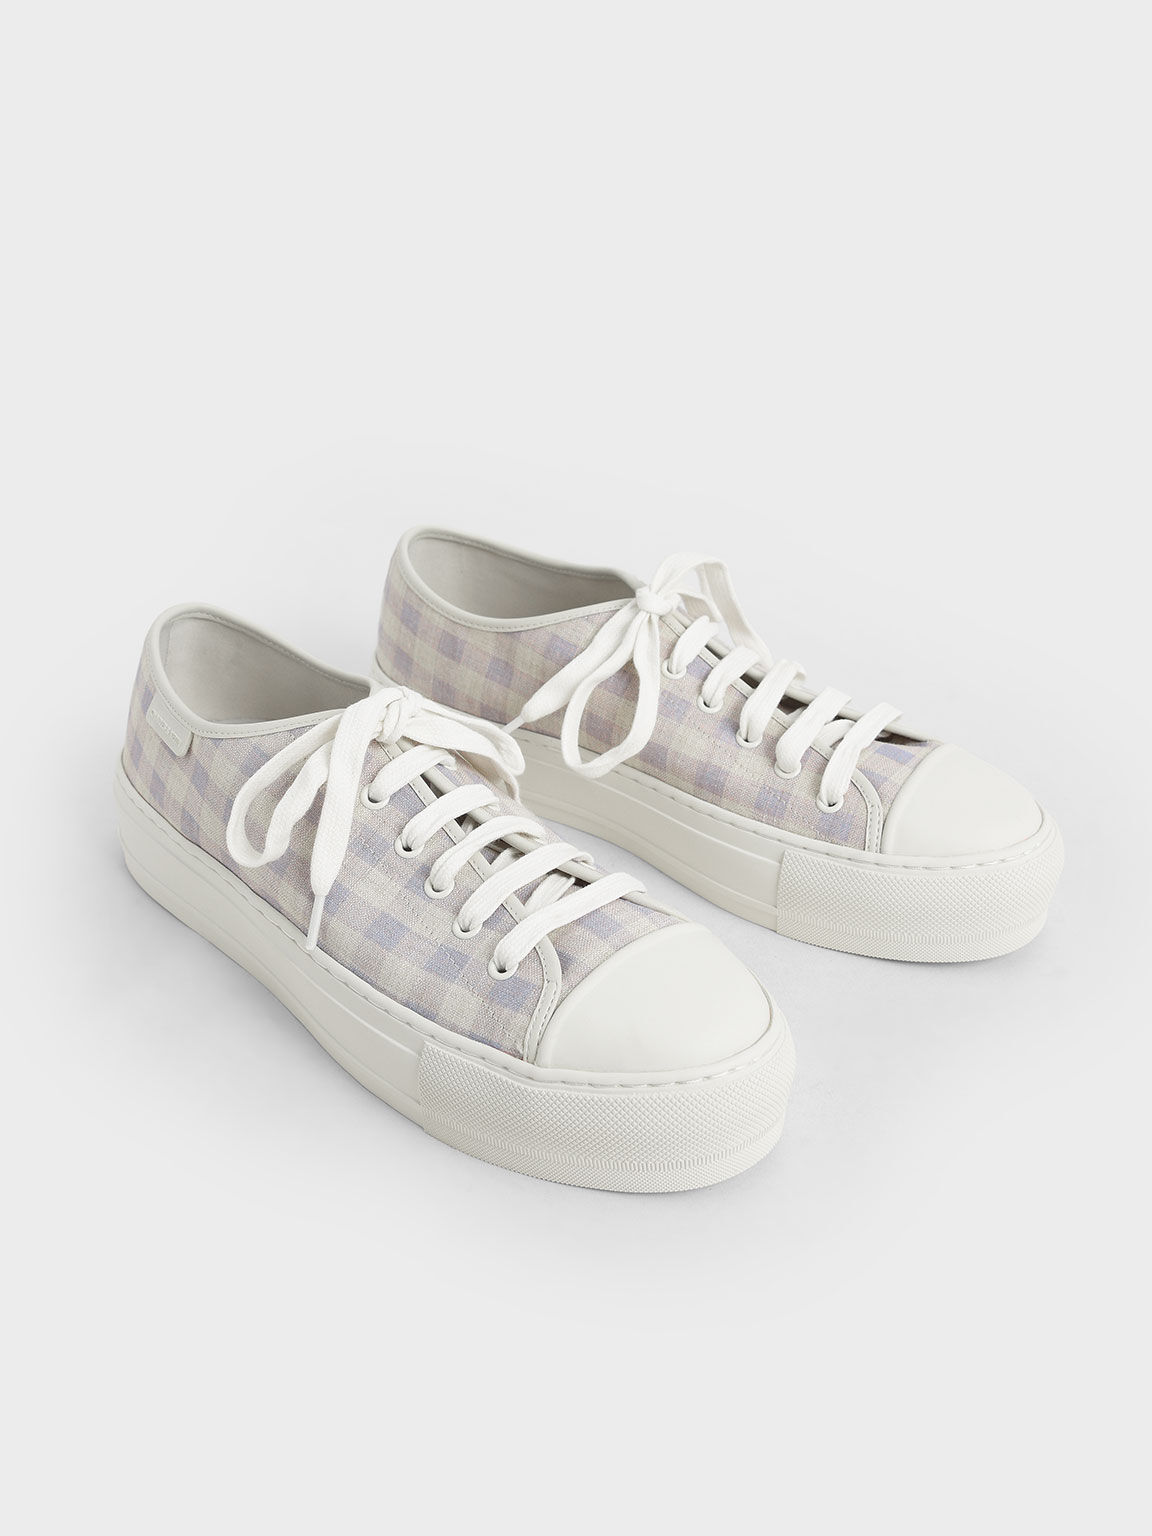 Woven Gingham Sneakers, Lilac Grey, hi-res